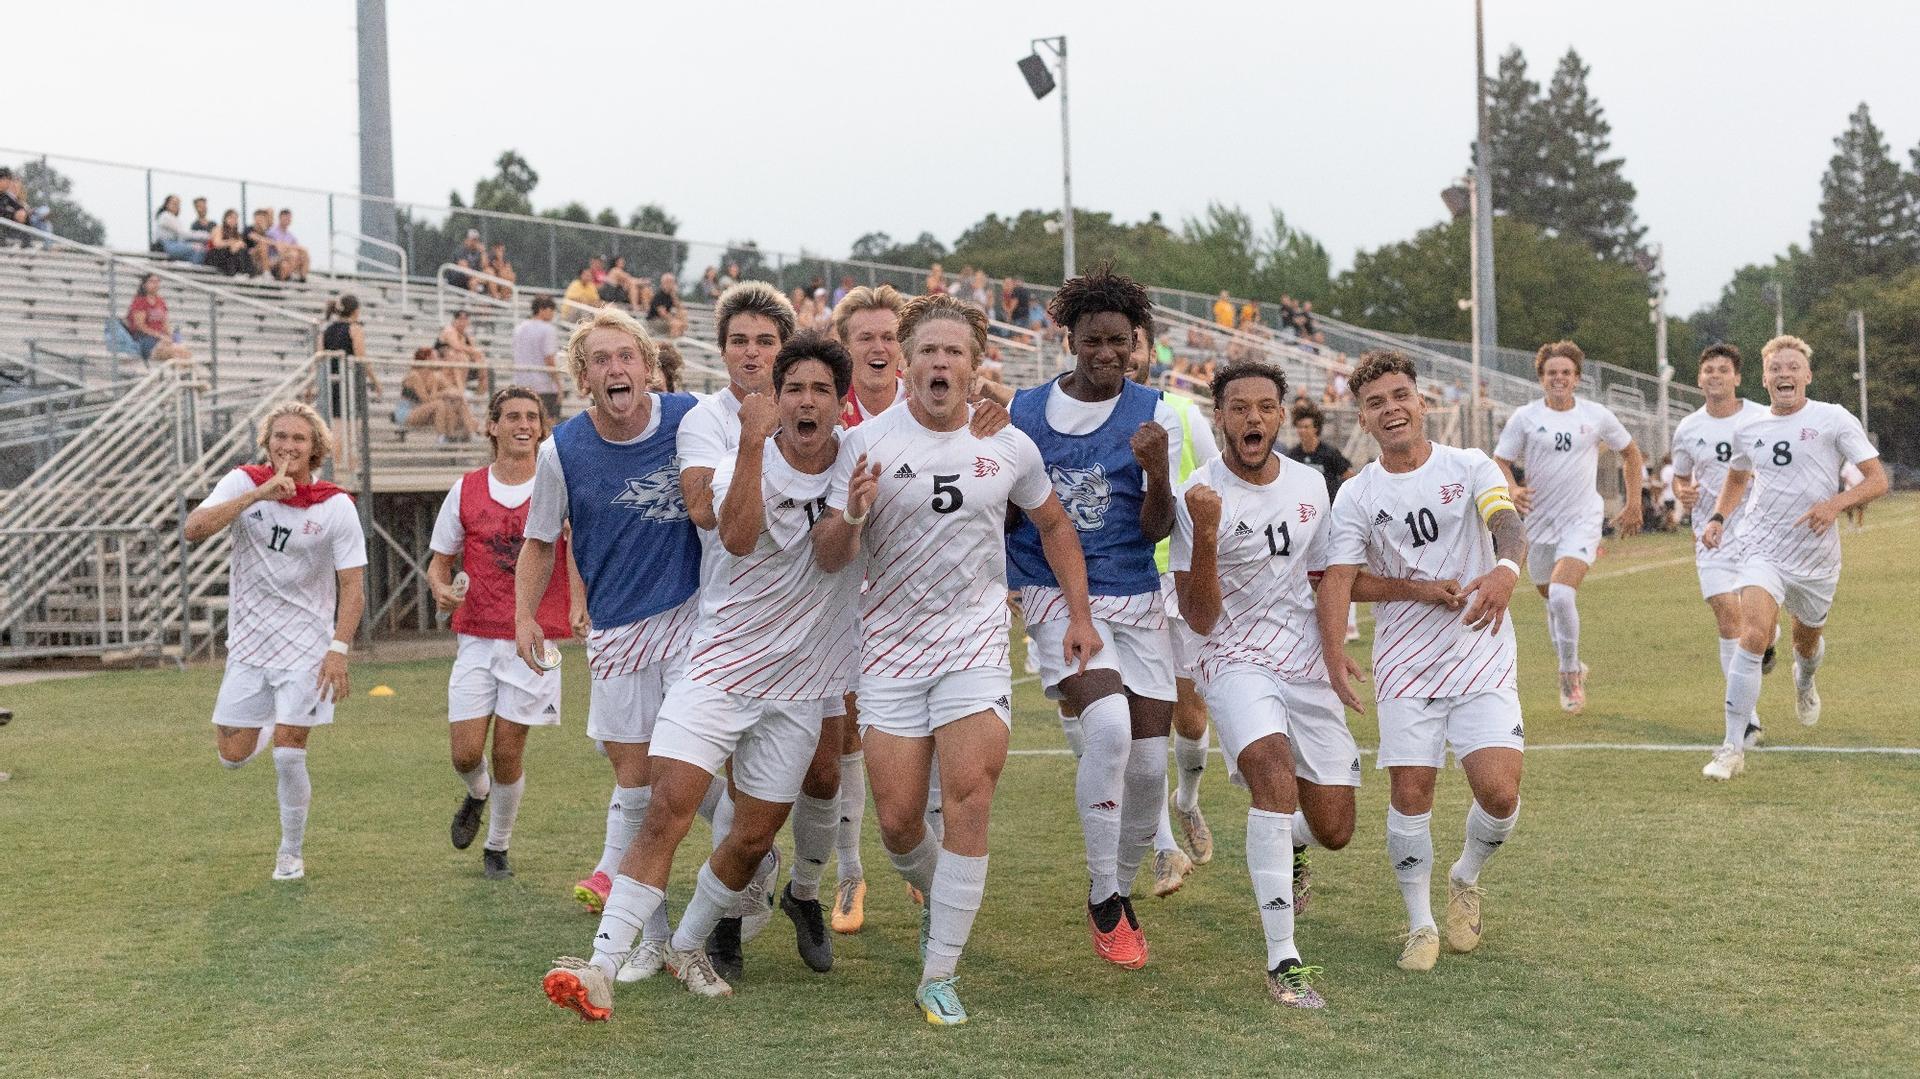 The Wildcats celebrate after Miles Rice (front center) scores a goal.